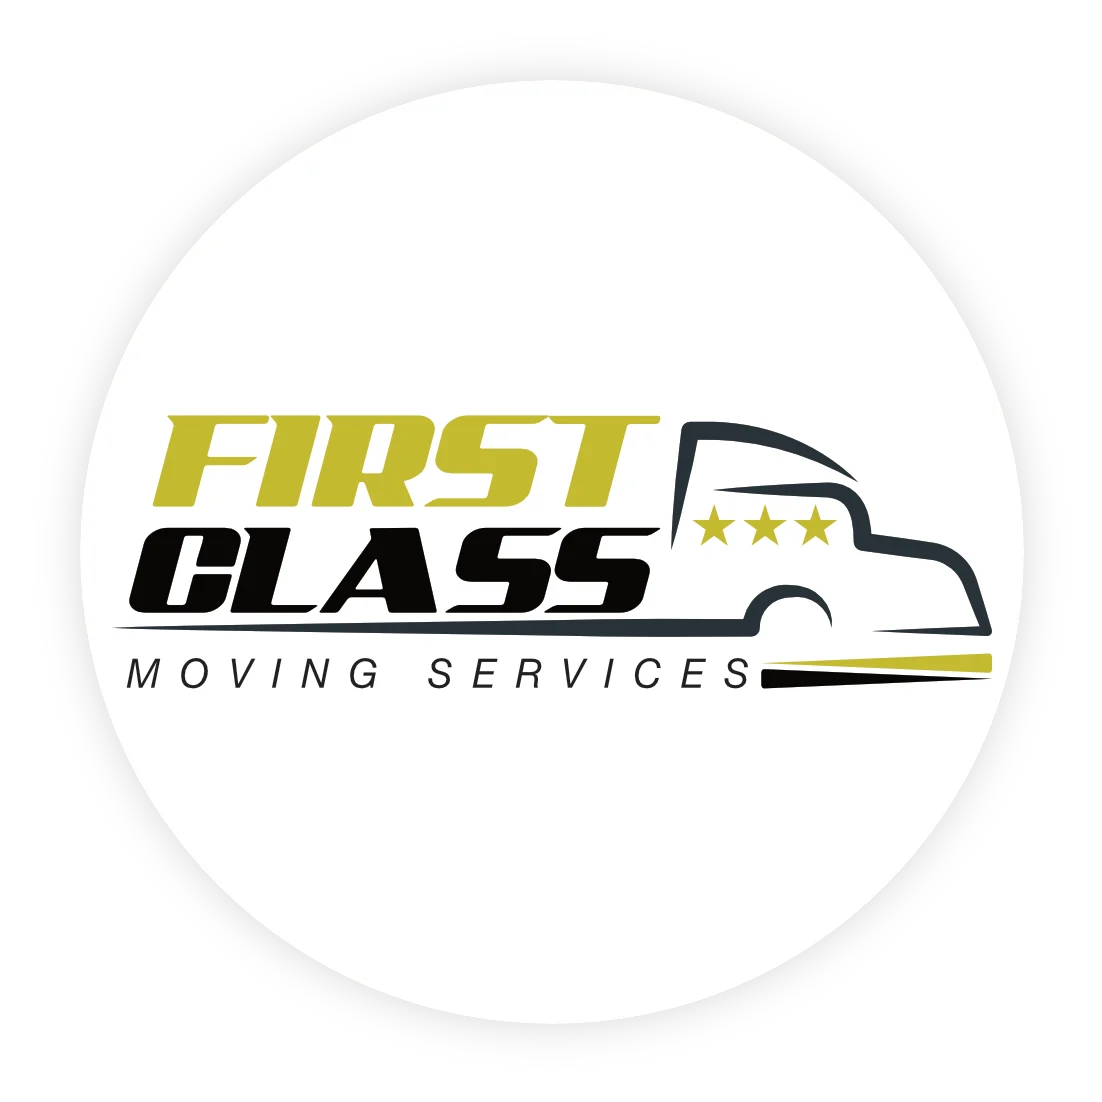 First Class Moving Services